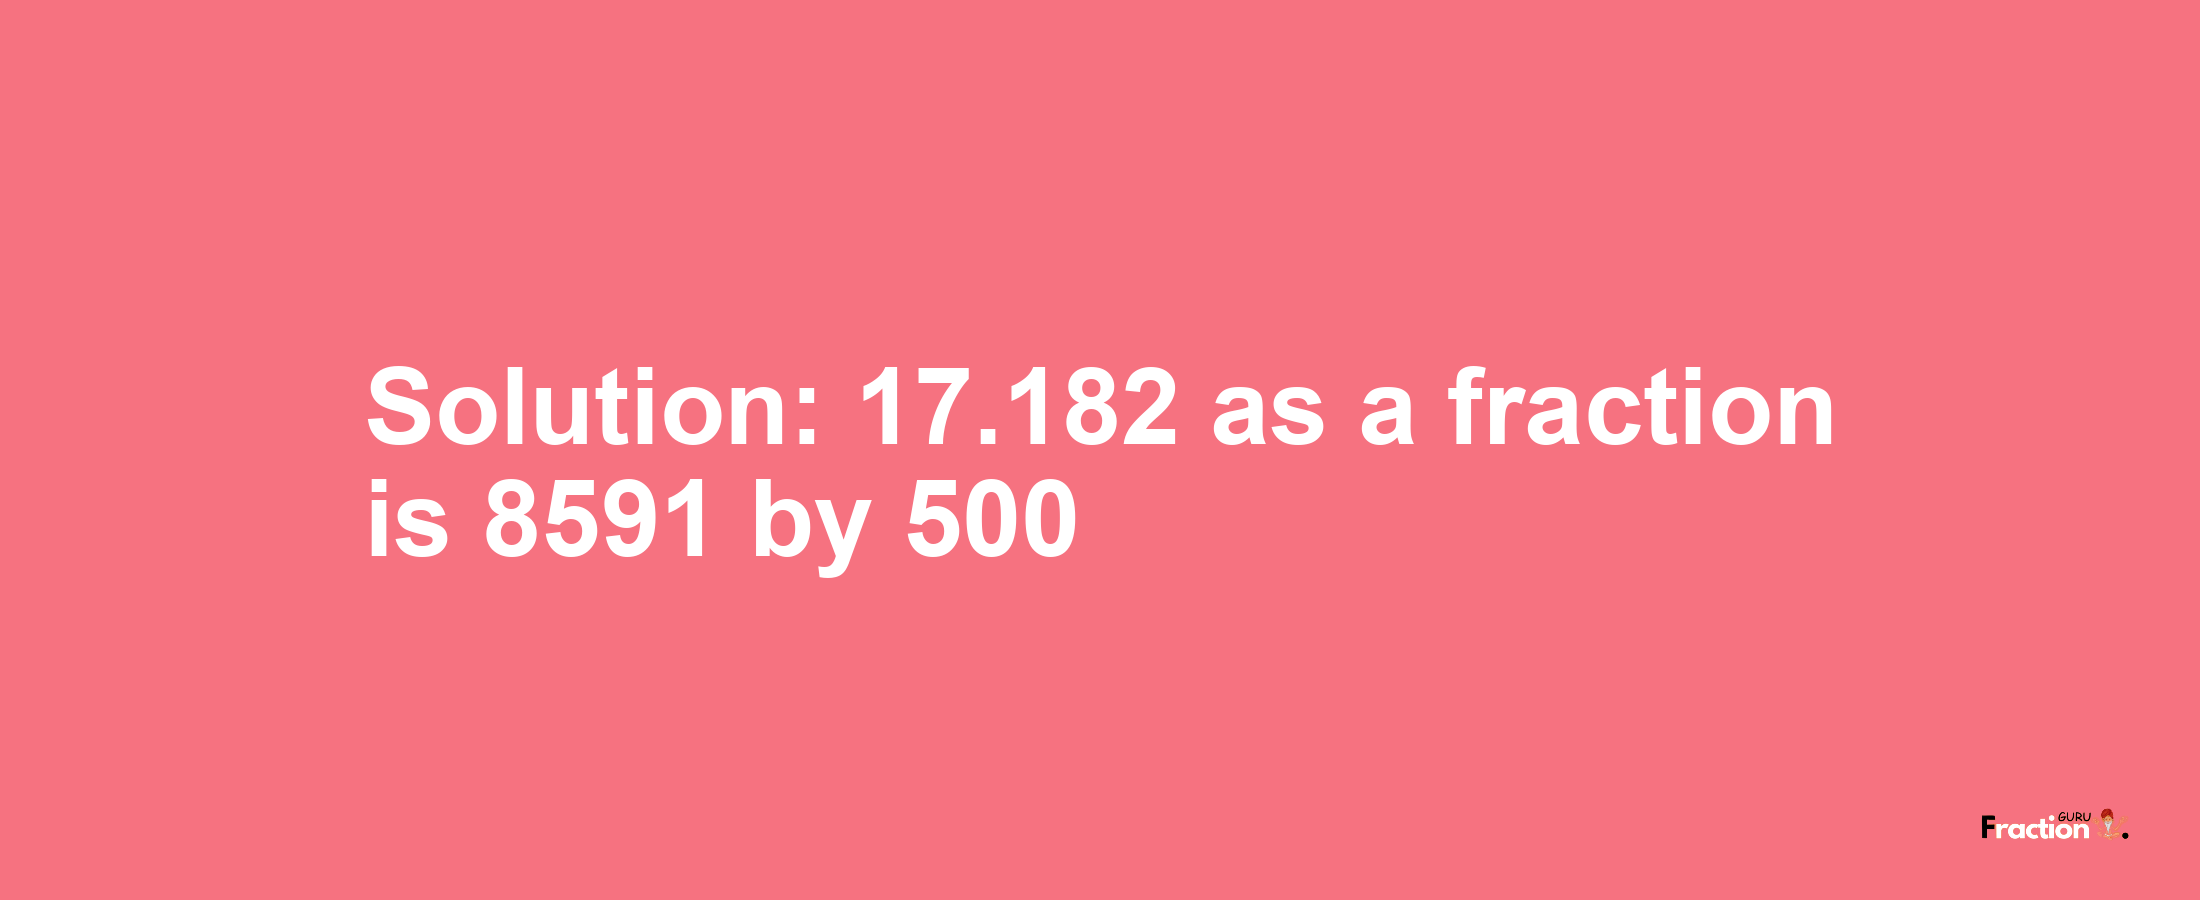 Solution:17.182 as a fraction is 8591/500